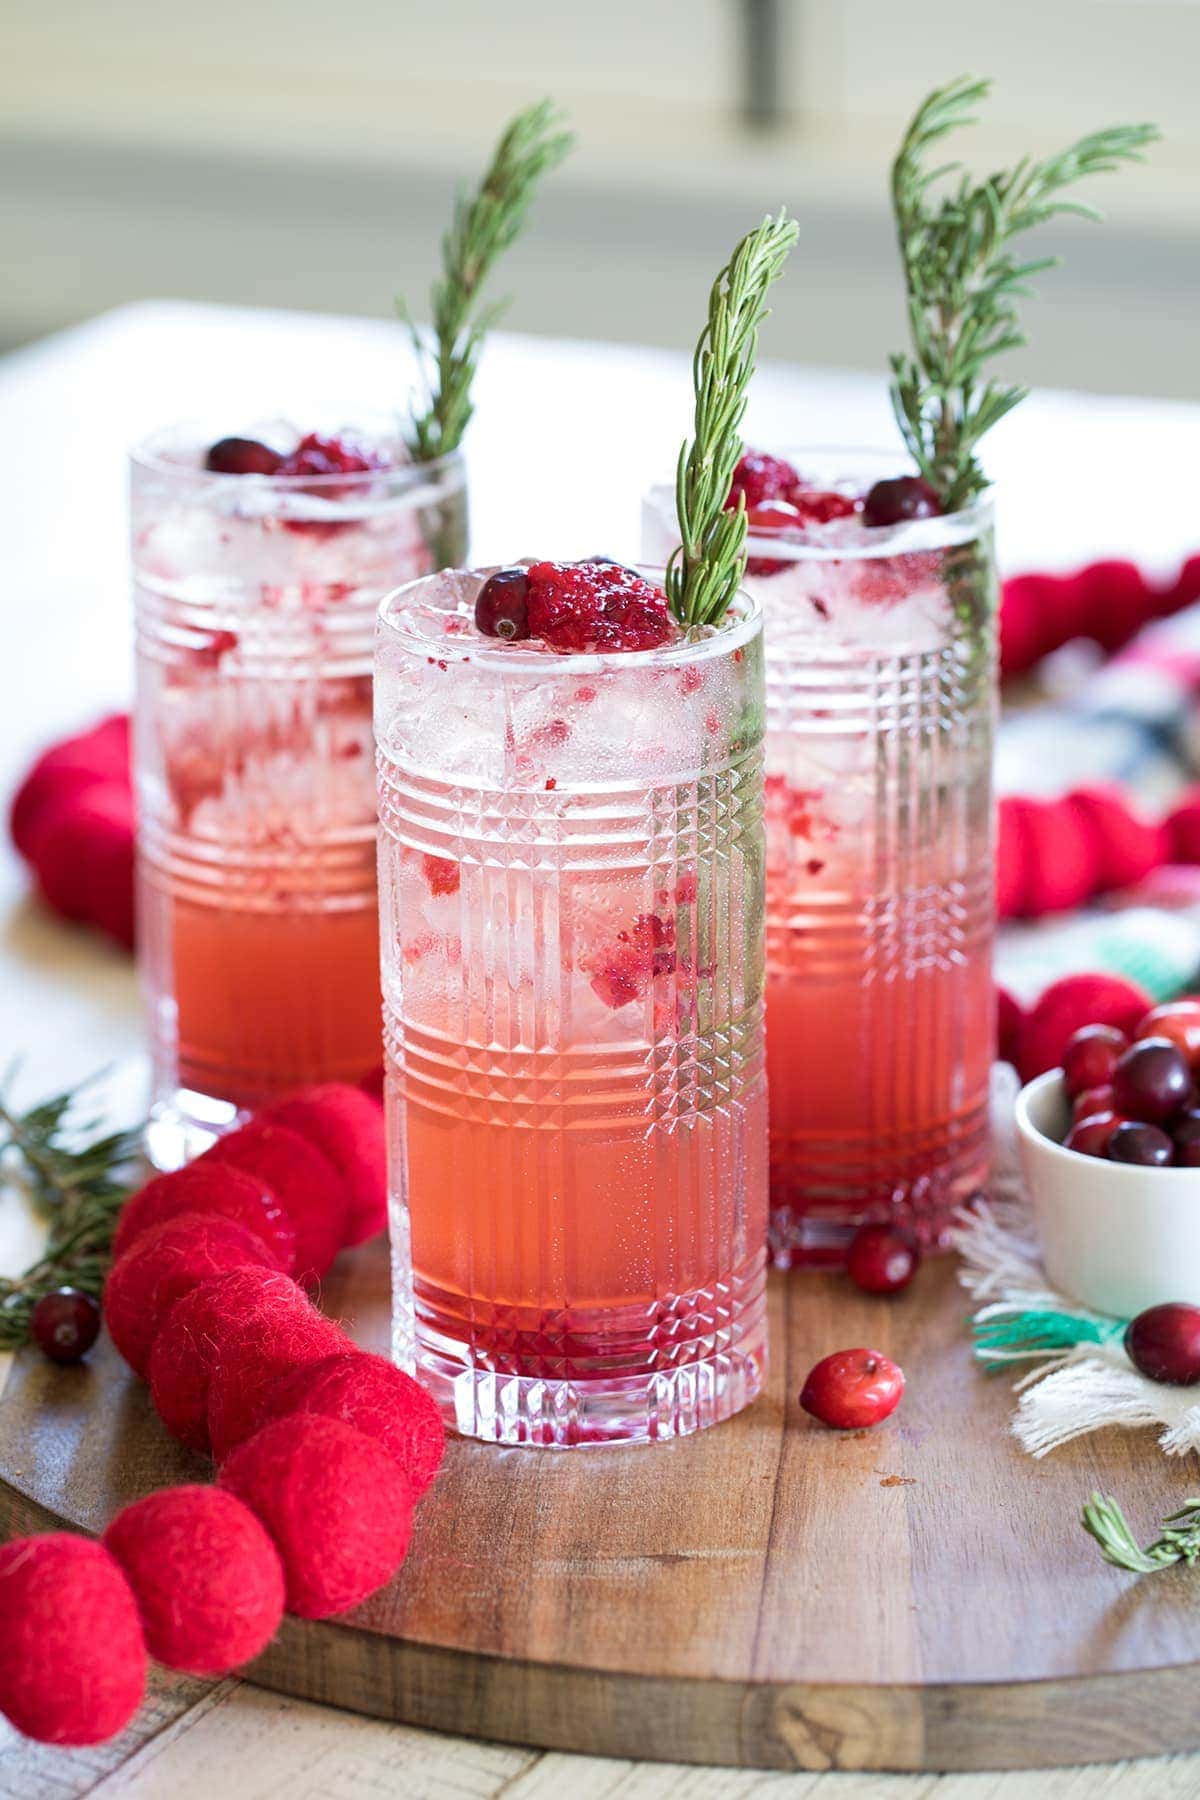 Gin and Cranberry Juice Cocktail Drink Recipe - dobbernationLOVES